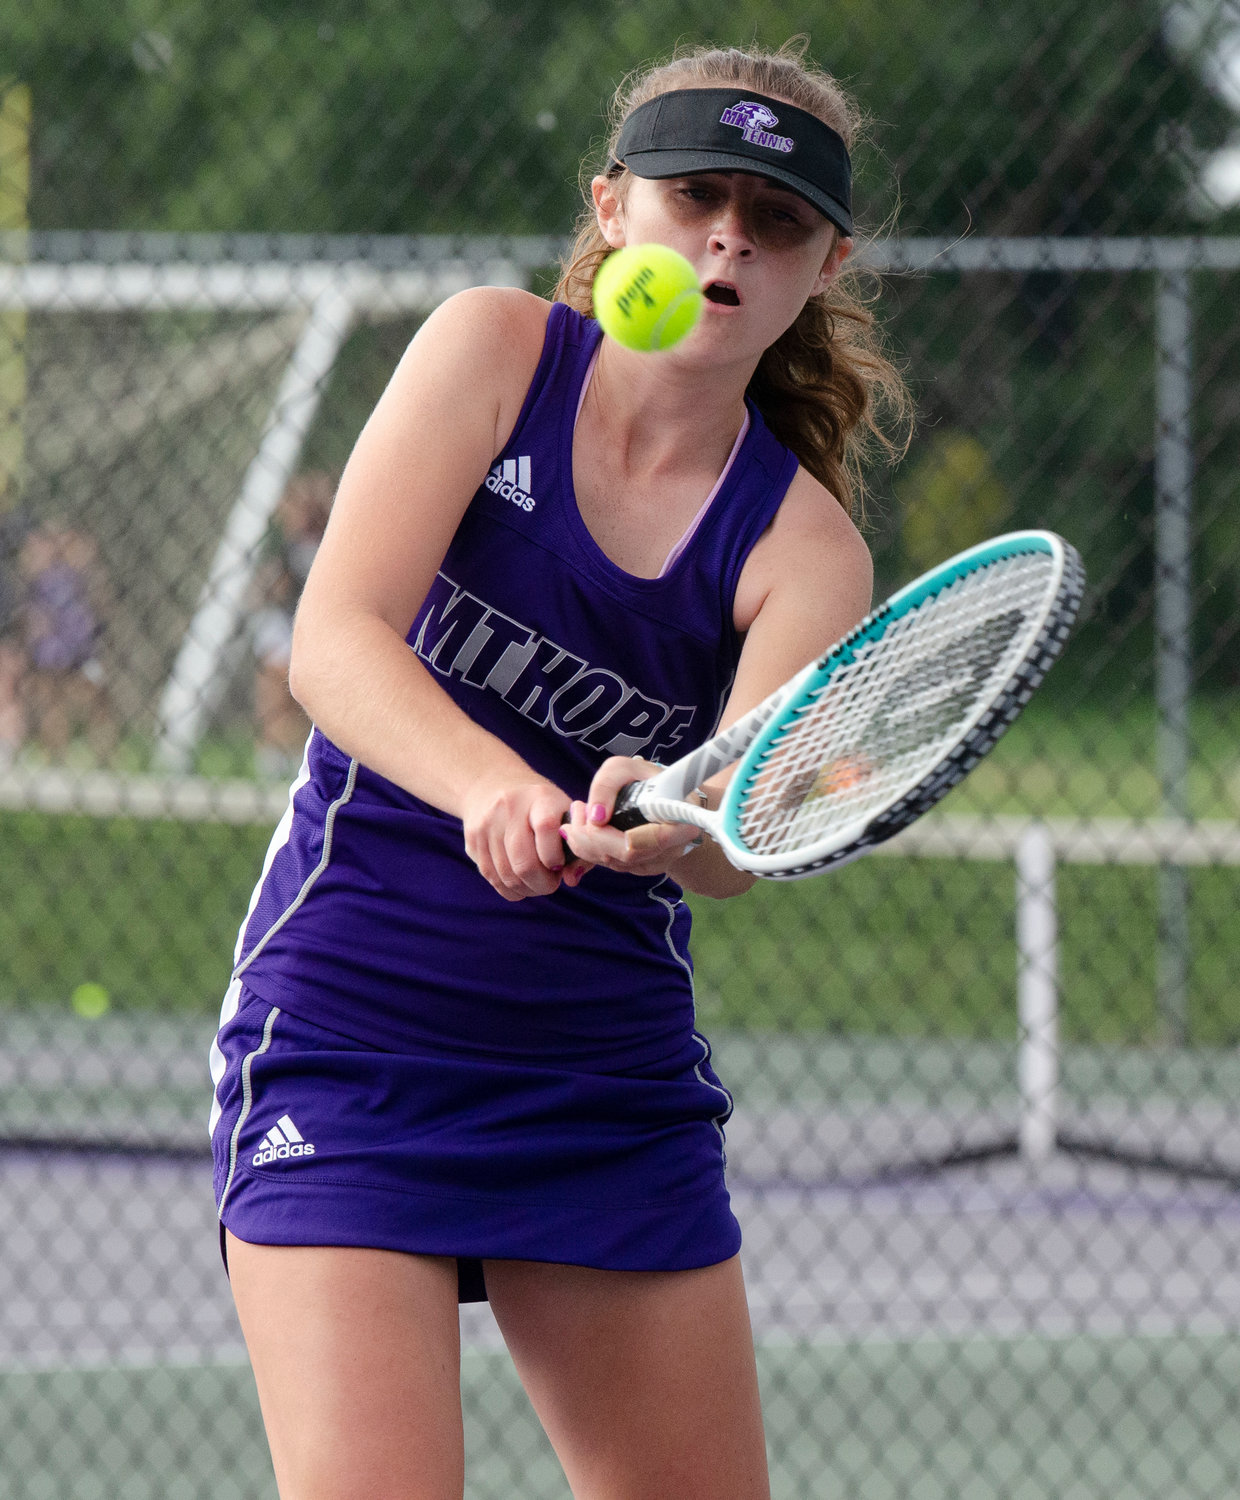 four singles player Ella Quesnelle hits a backhand during her match.